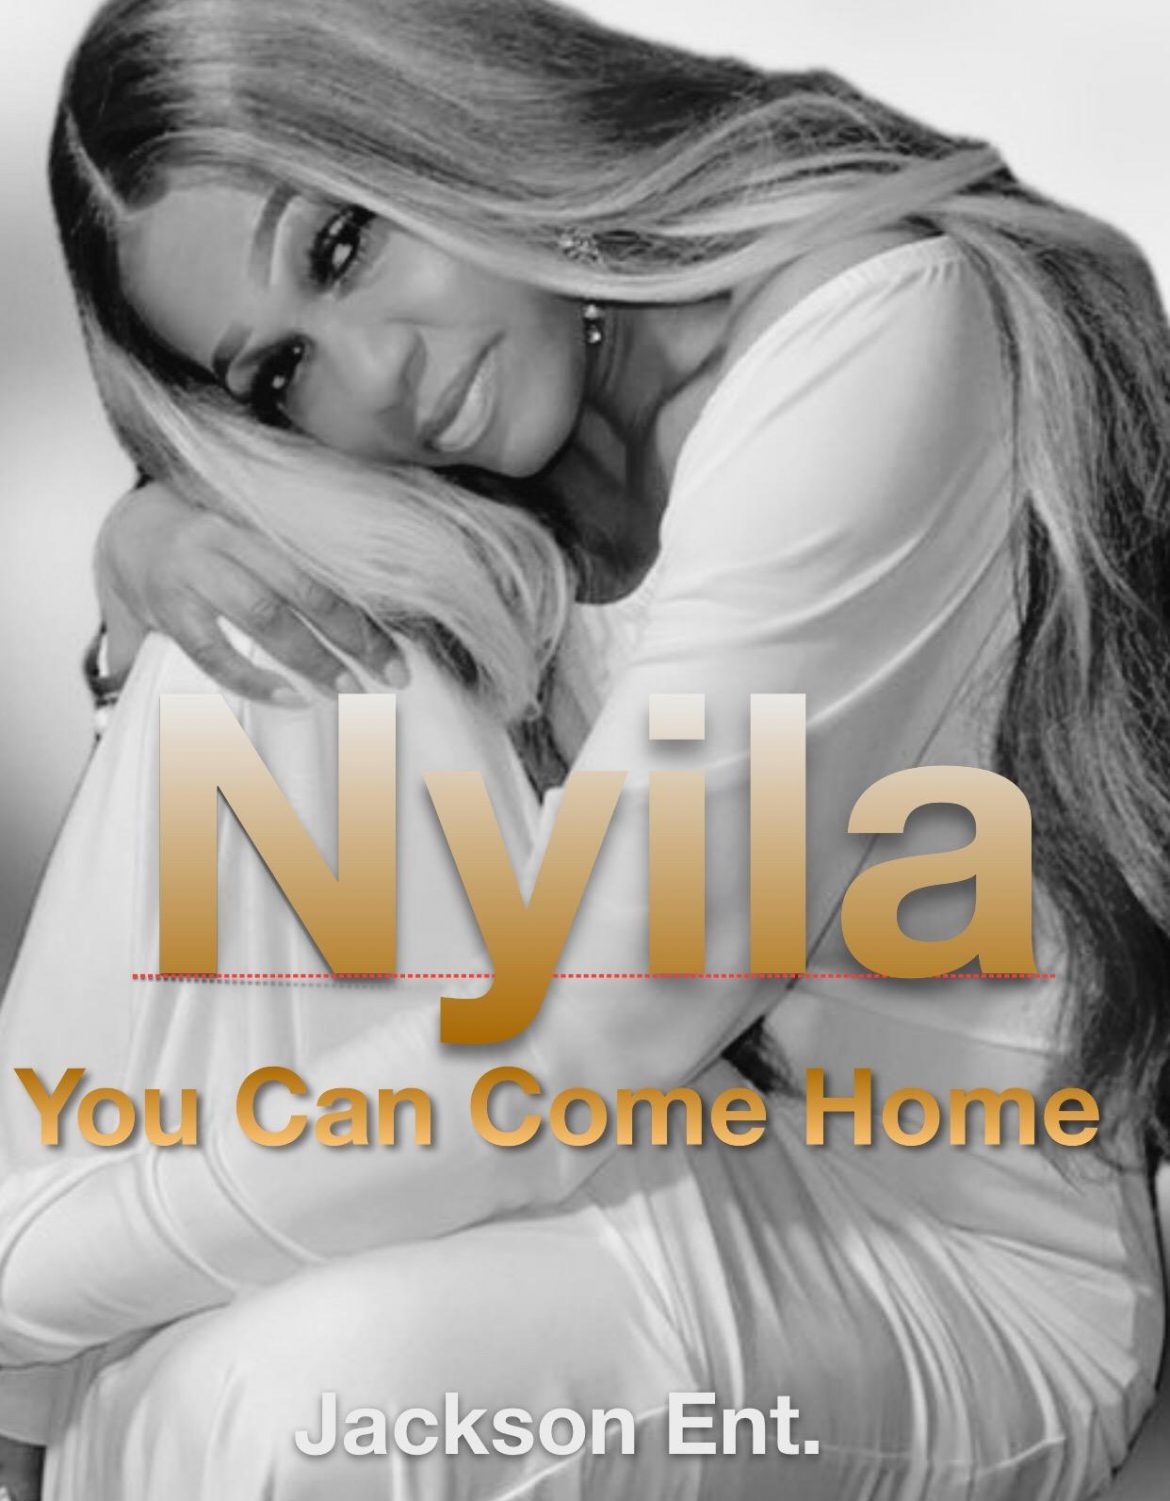 The new single ‘You Can Come Home’ from ‘Nyil’a’ with its romantic, dreamy and classy sound is on the playlist now.